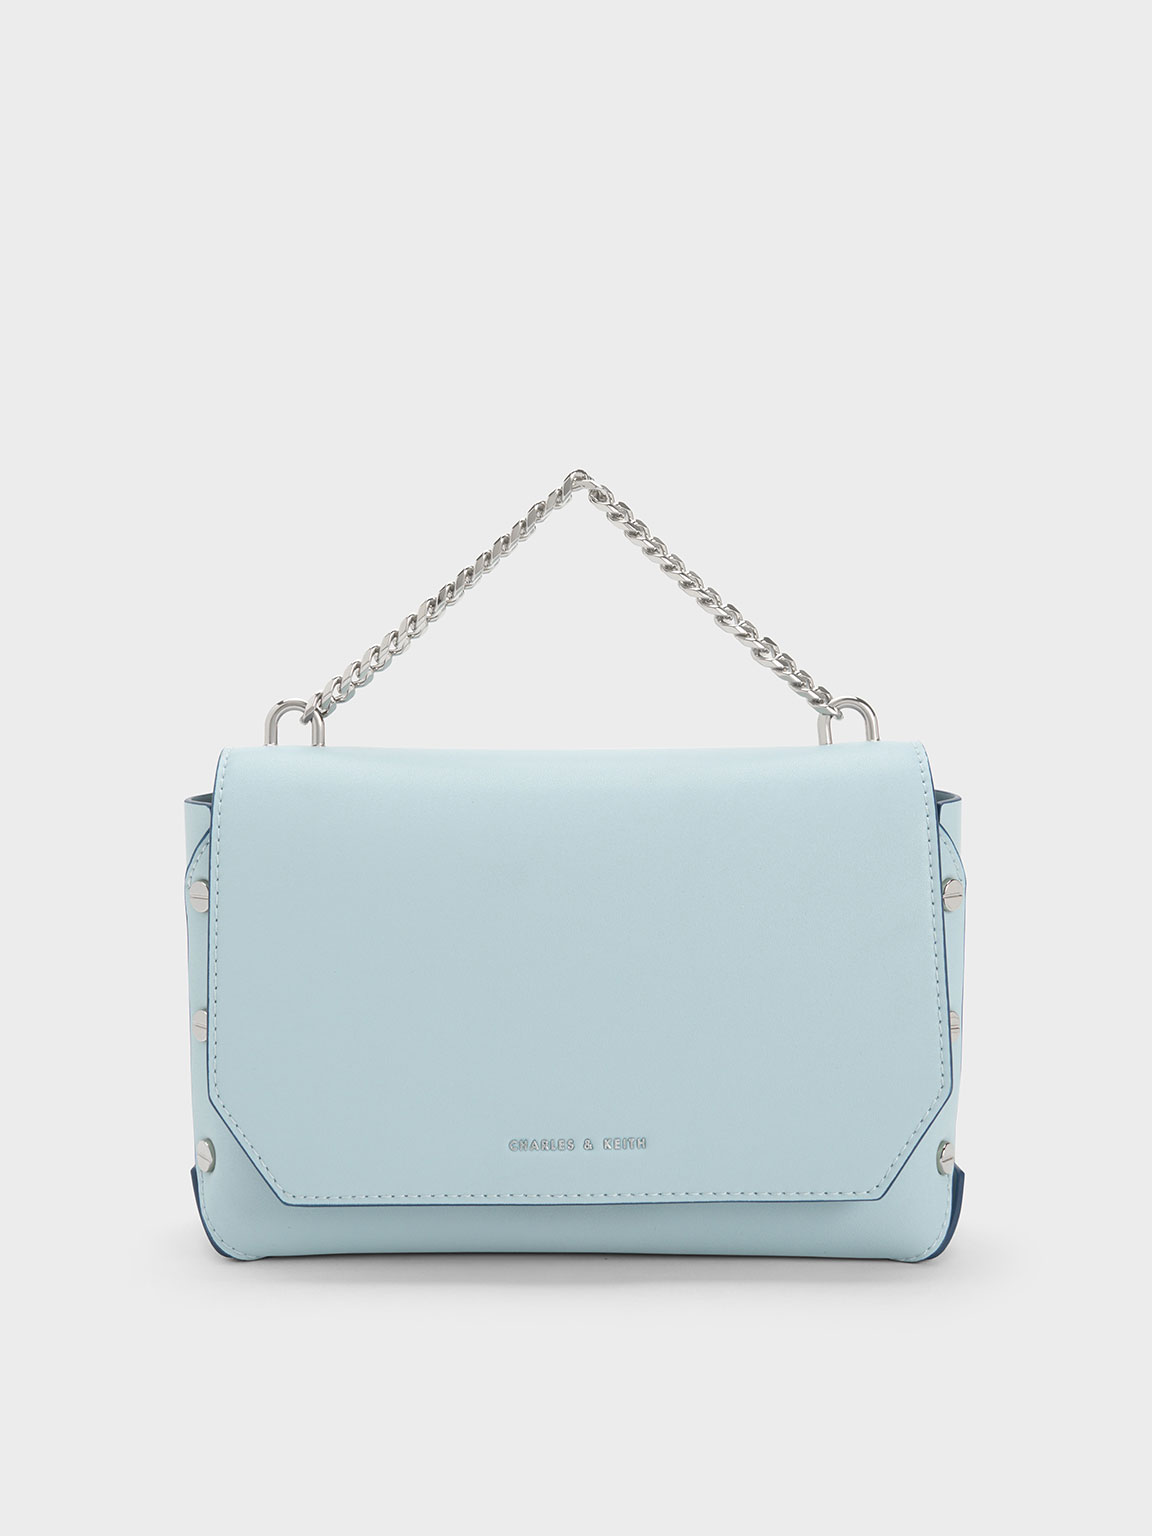 Charles & Keith Metallic Accent Front Flap Bag In Blue